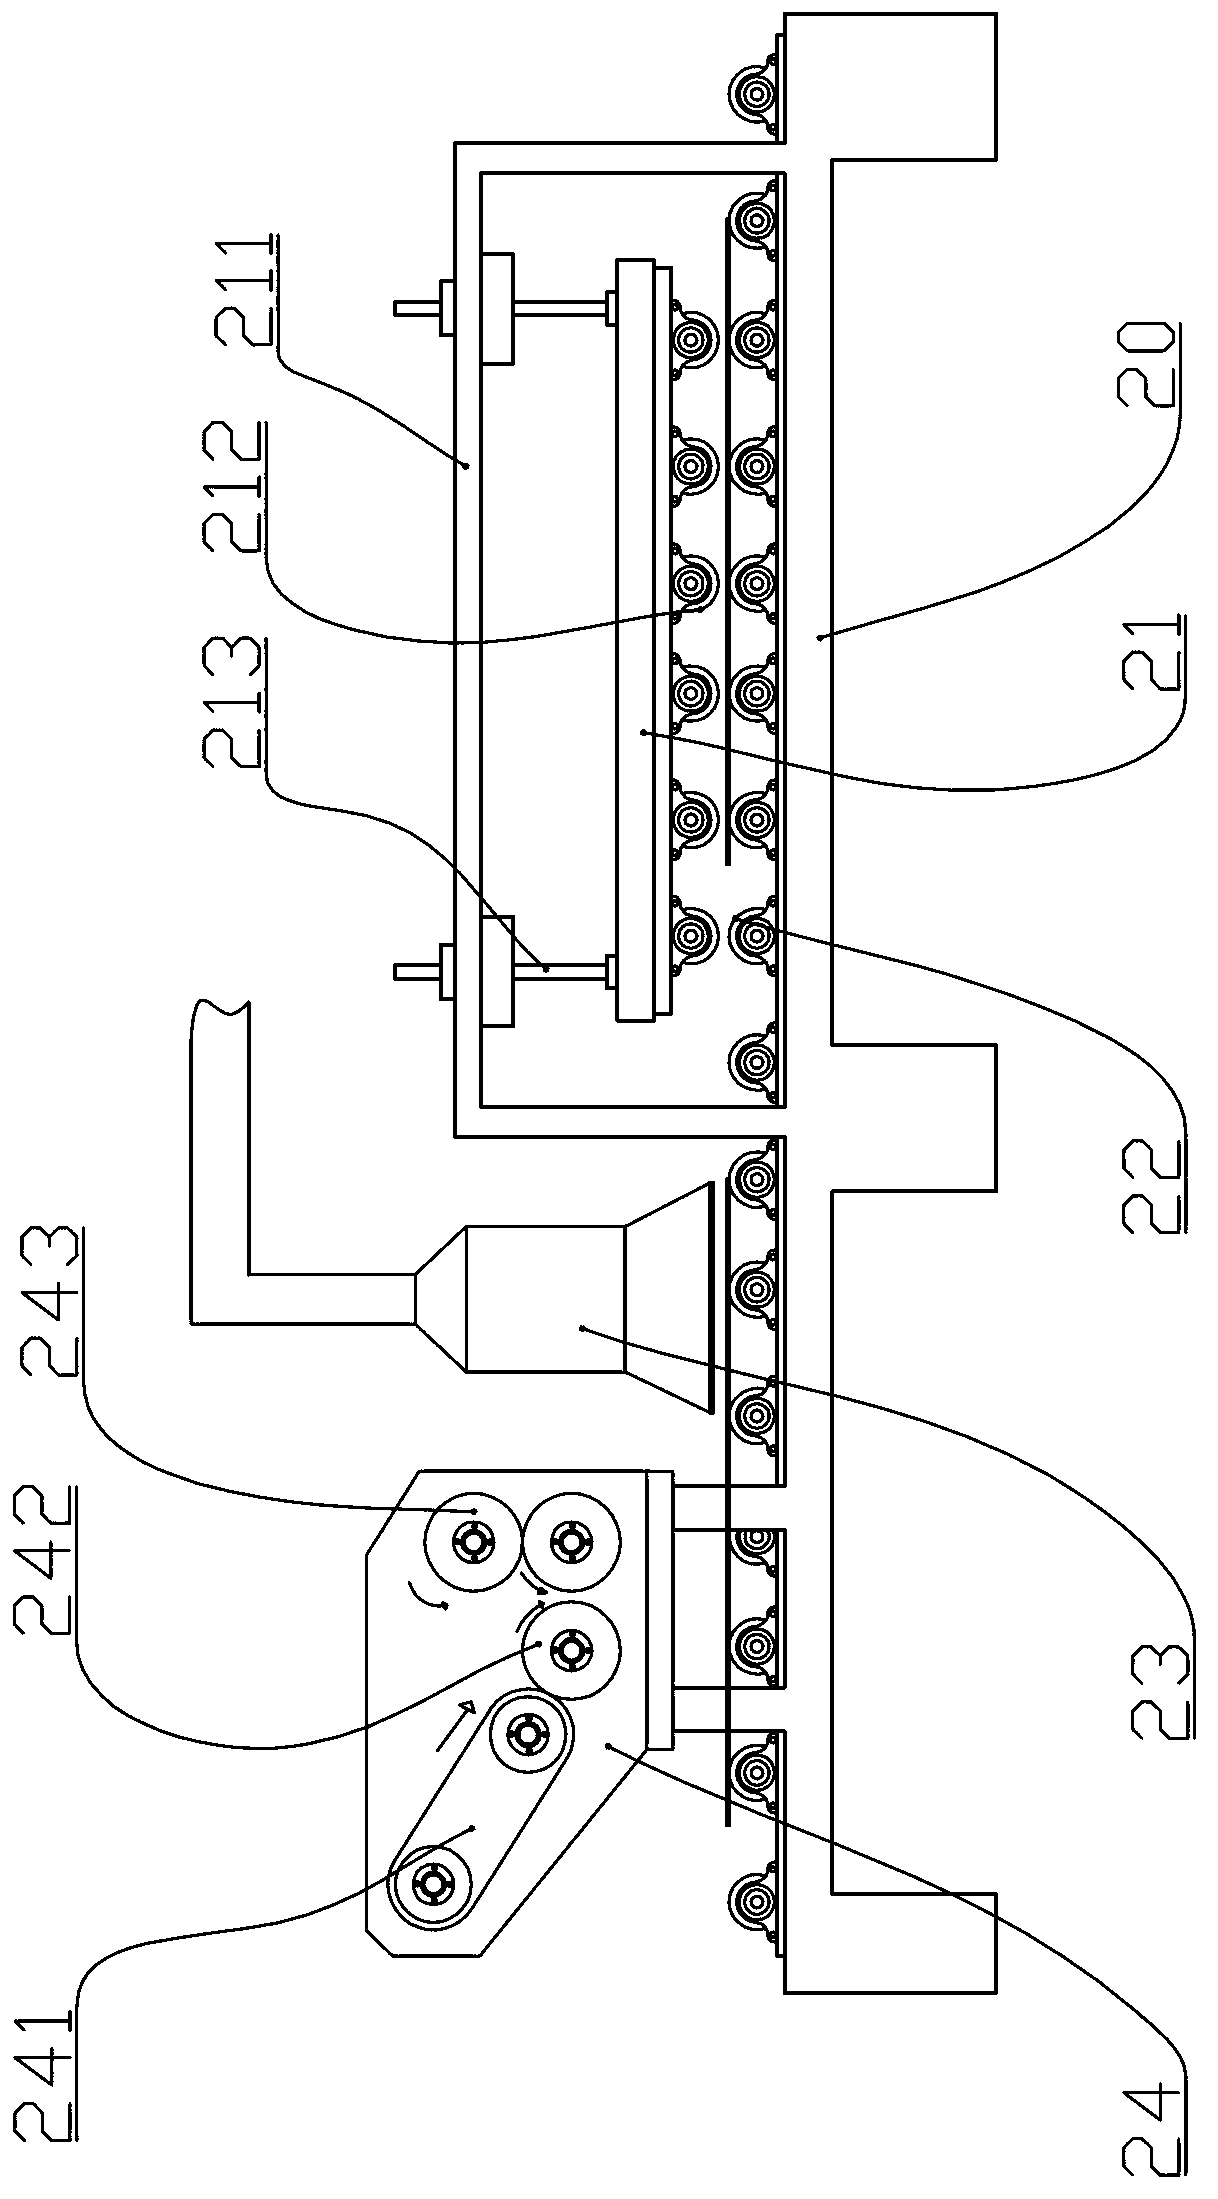 Material spreading system of embossed plate processing equipment